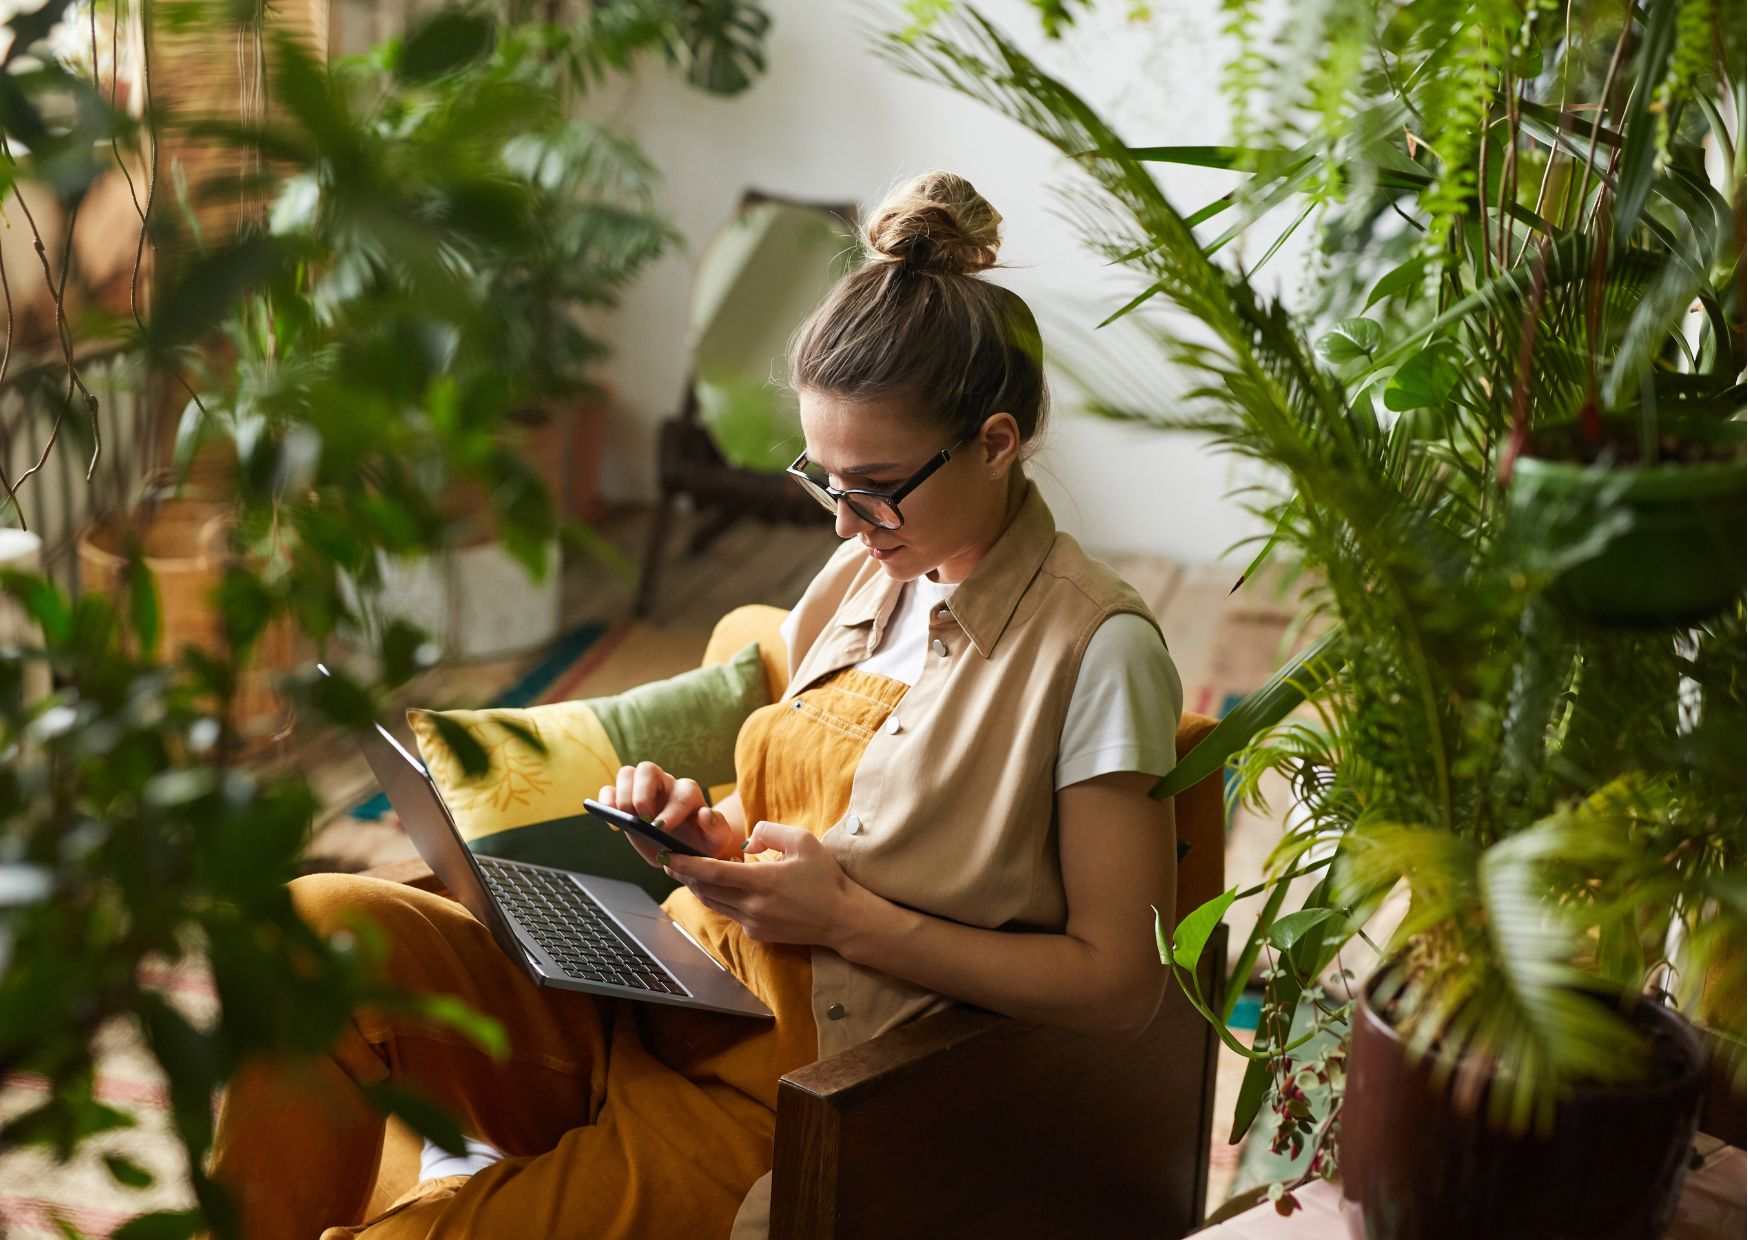 A women on her phone and computer around a bunch of houseplants.